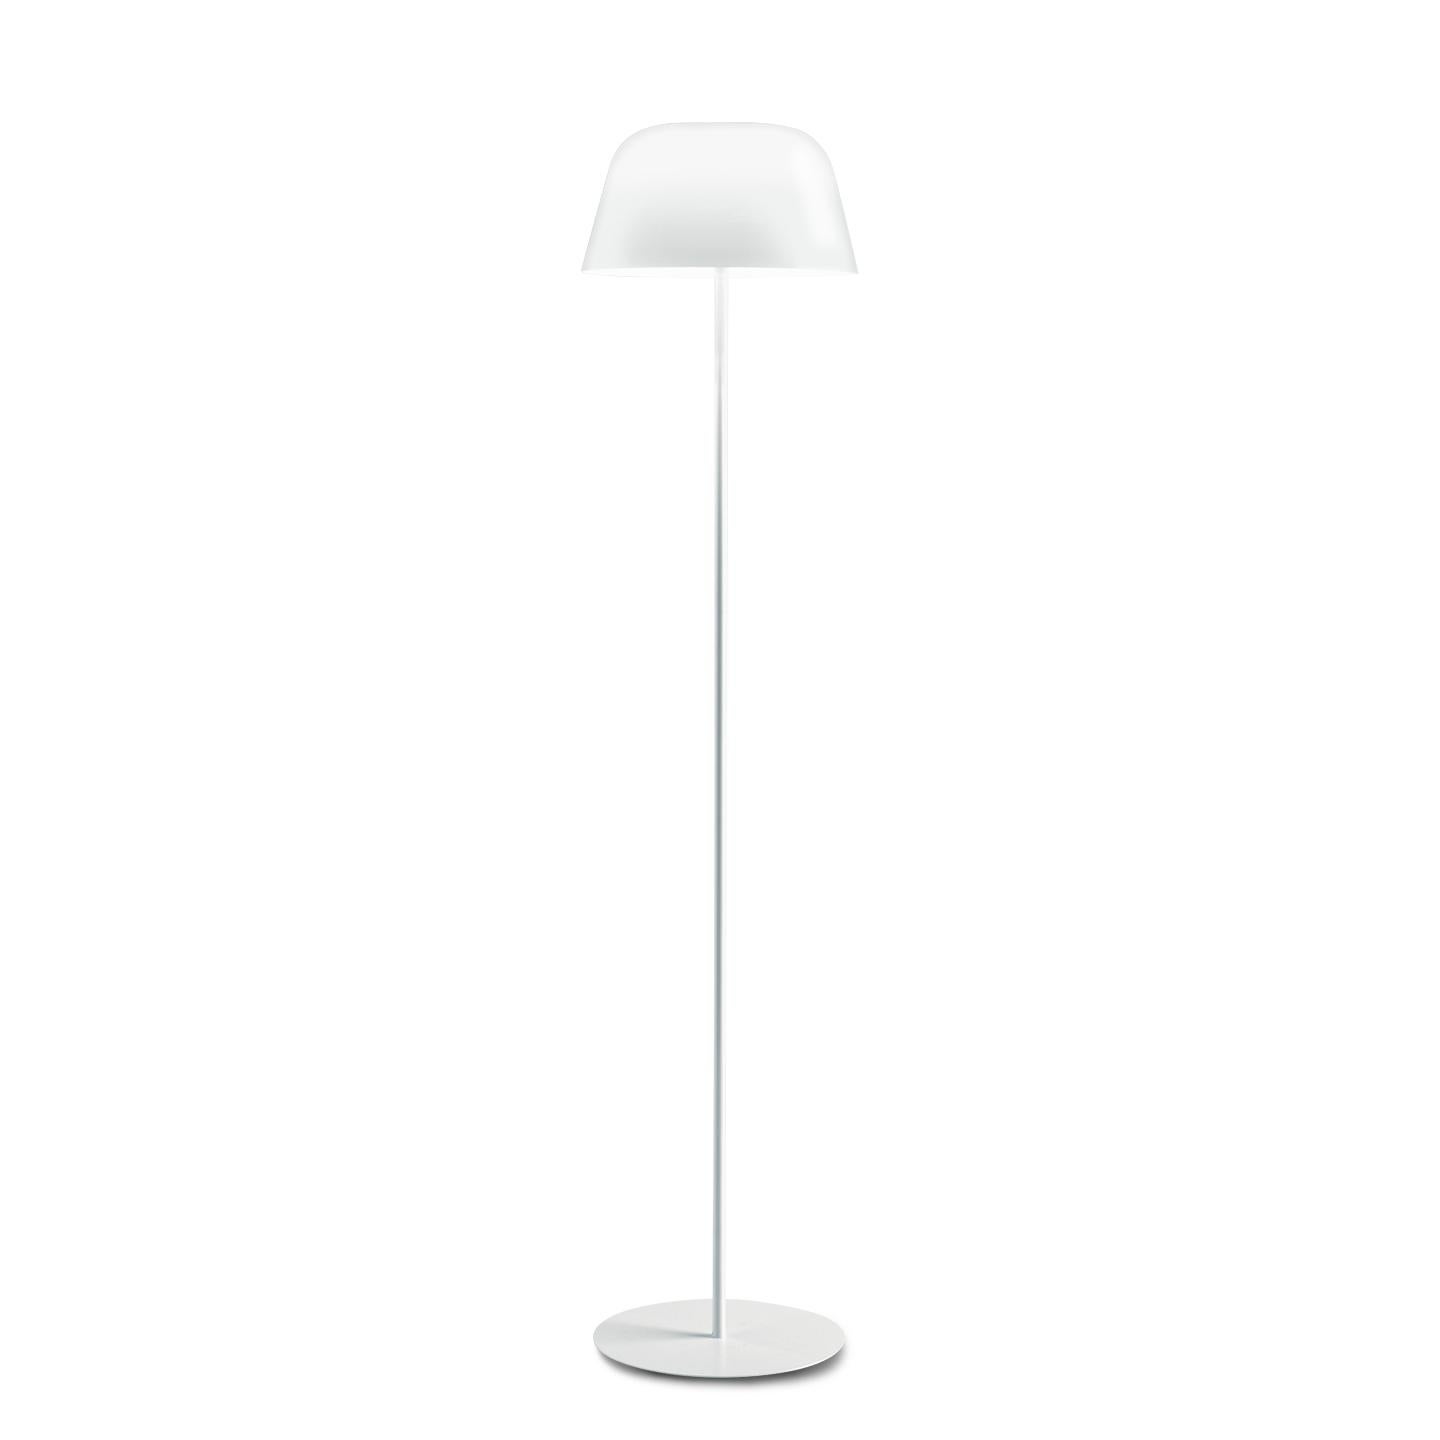 The Ayers floor lamp is designed with clean lines that create an impact. Designed by MarCo Piva in 2005, its hand blown diffuser is made of multiple layers of glass to create a rich, white look. This traditional Murano hand blown glass technique is